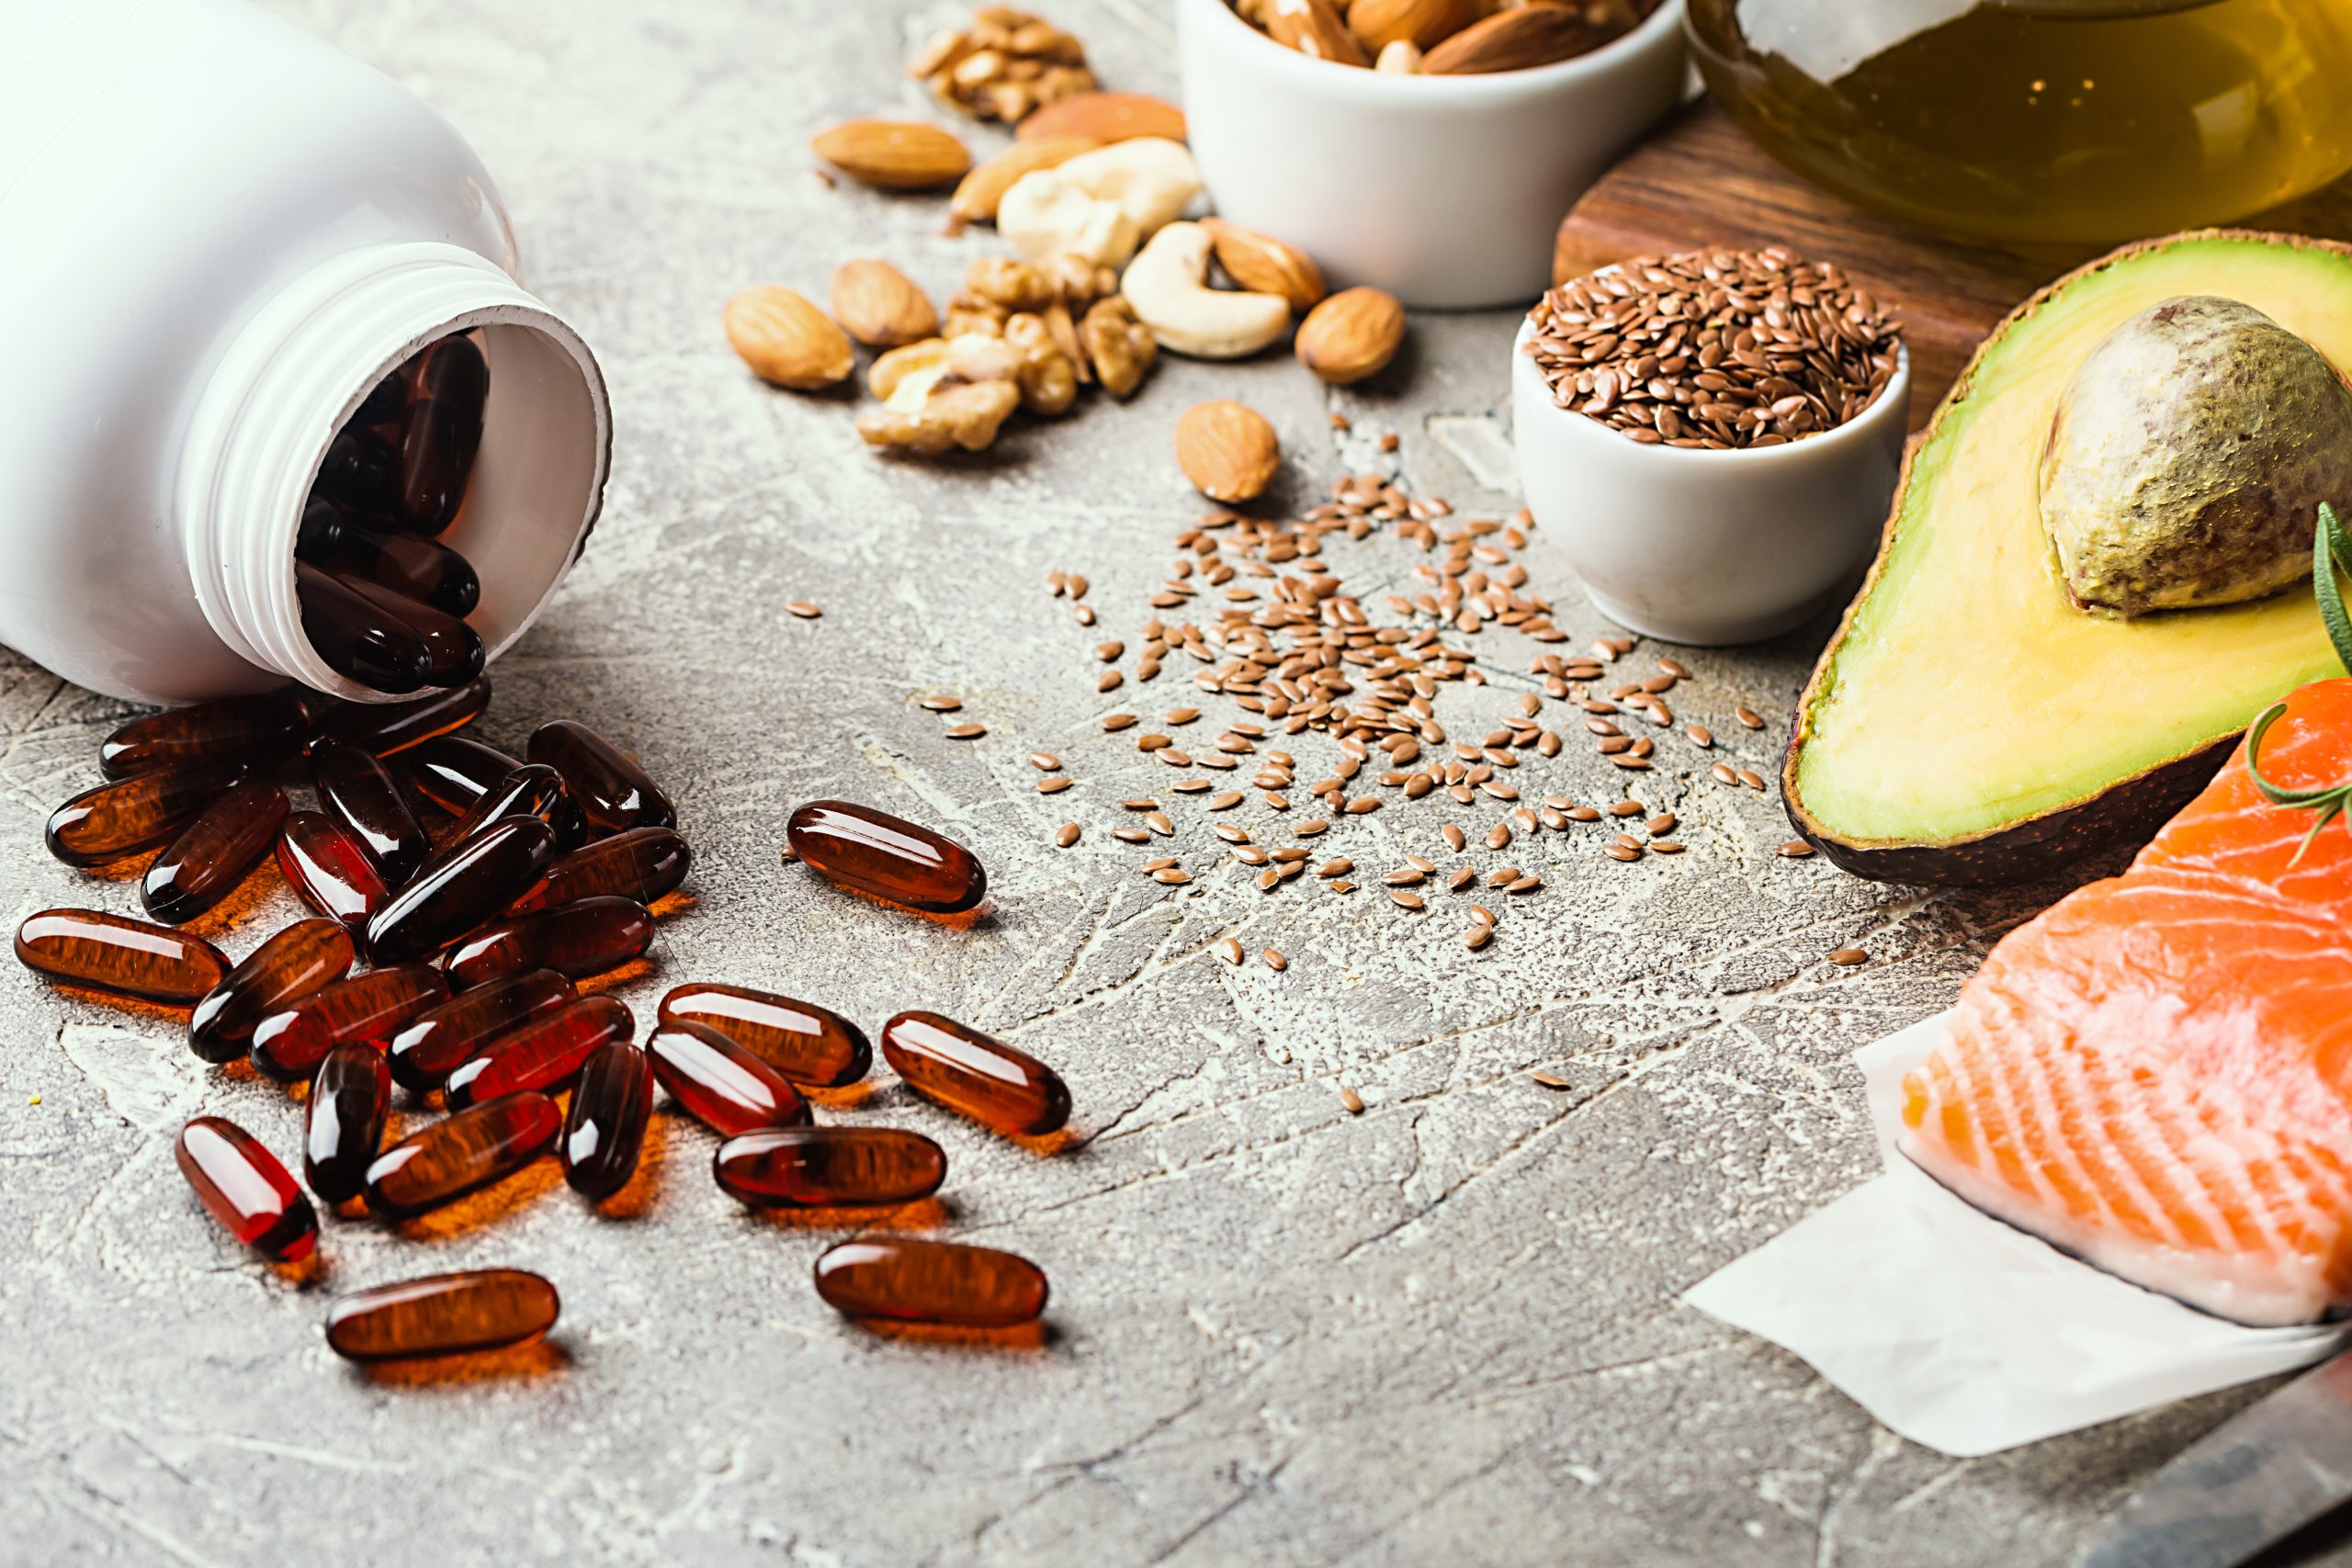 A variety of healthy fats and keto diet supplements displayed on a textured surface, featuring a spilled bottle of dark red keto diet pills, alongside almonds, walnuts, flaxseeds in white bowls, avocado, salmon, and a bottle of olive oil, illustrating components of a nutritious ketogenic diet.